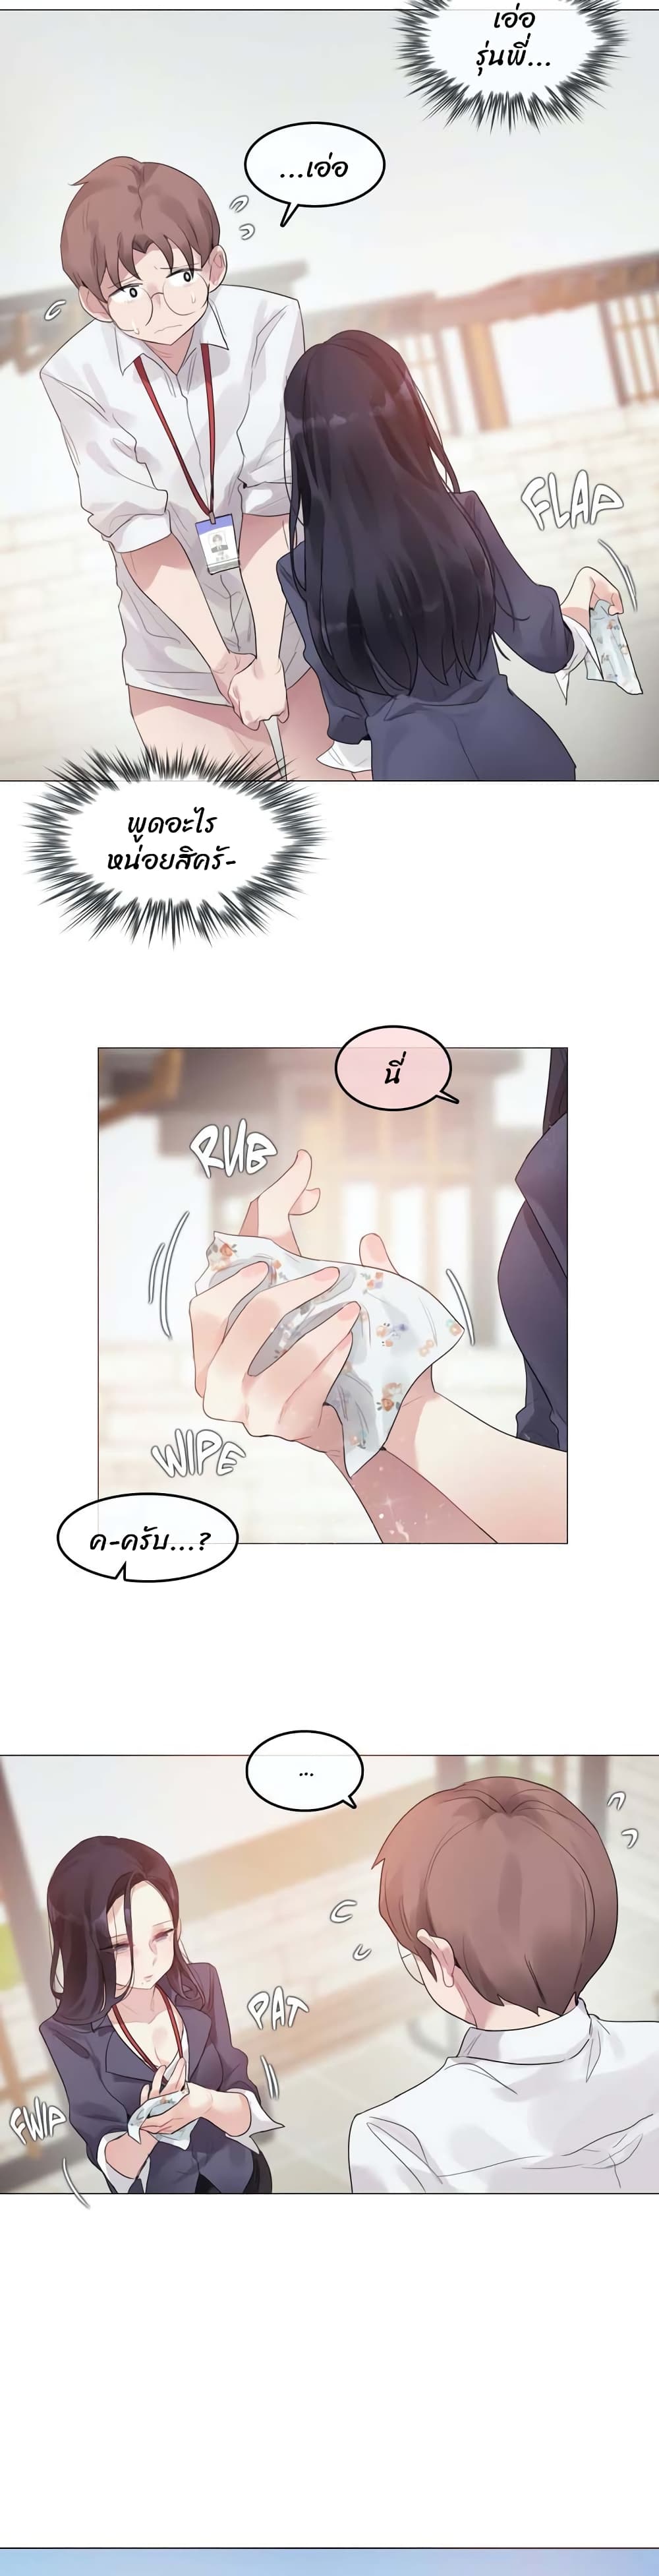 A Pervert's Daily Life 95 (3)